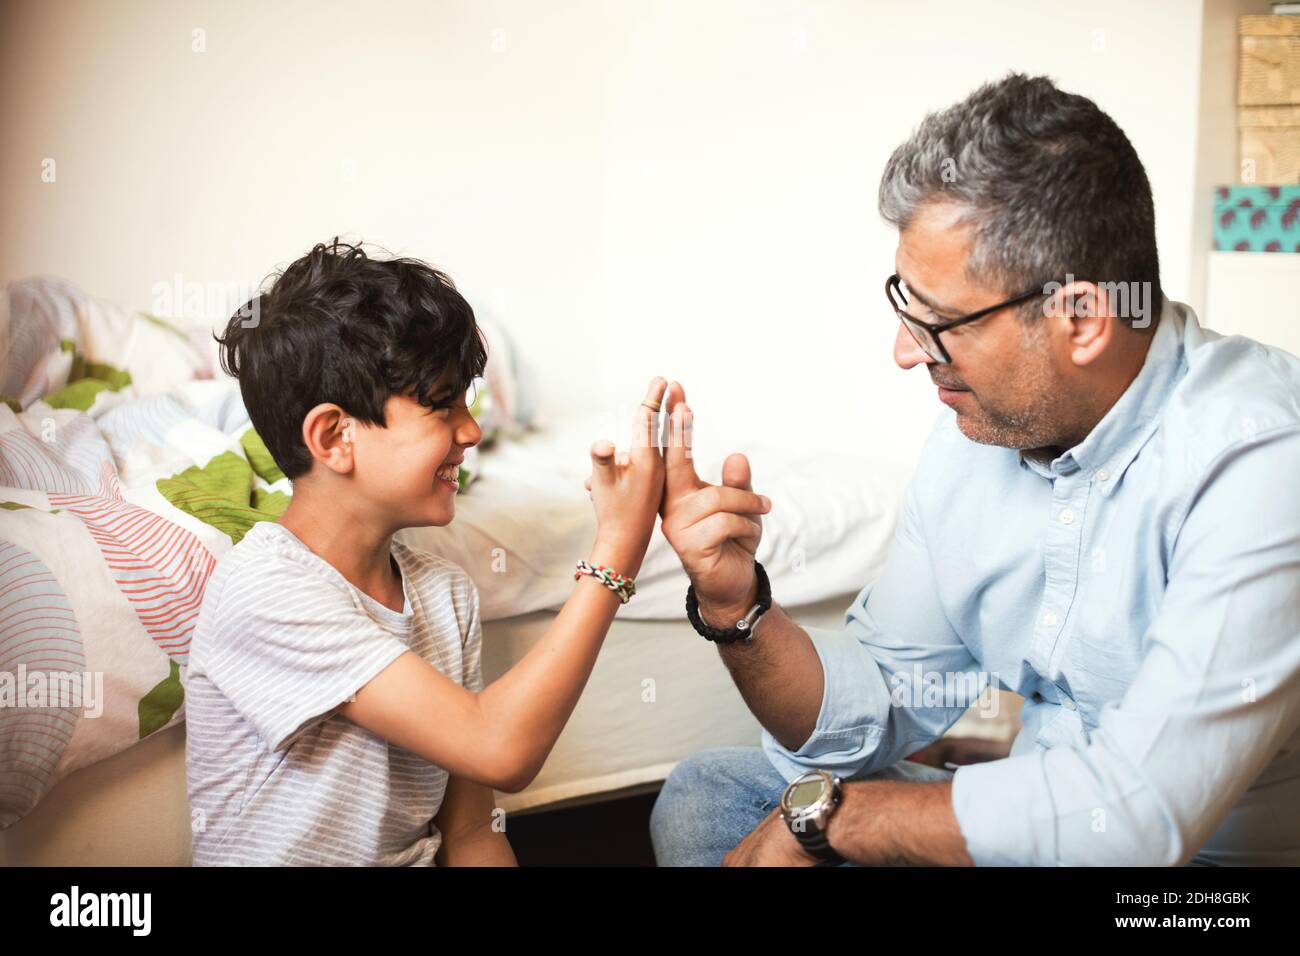 Smiling father and son playing with rubber bands while sitting at home Stock Photo